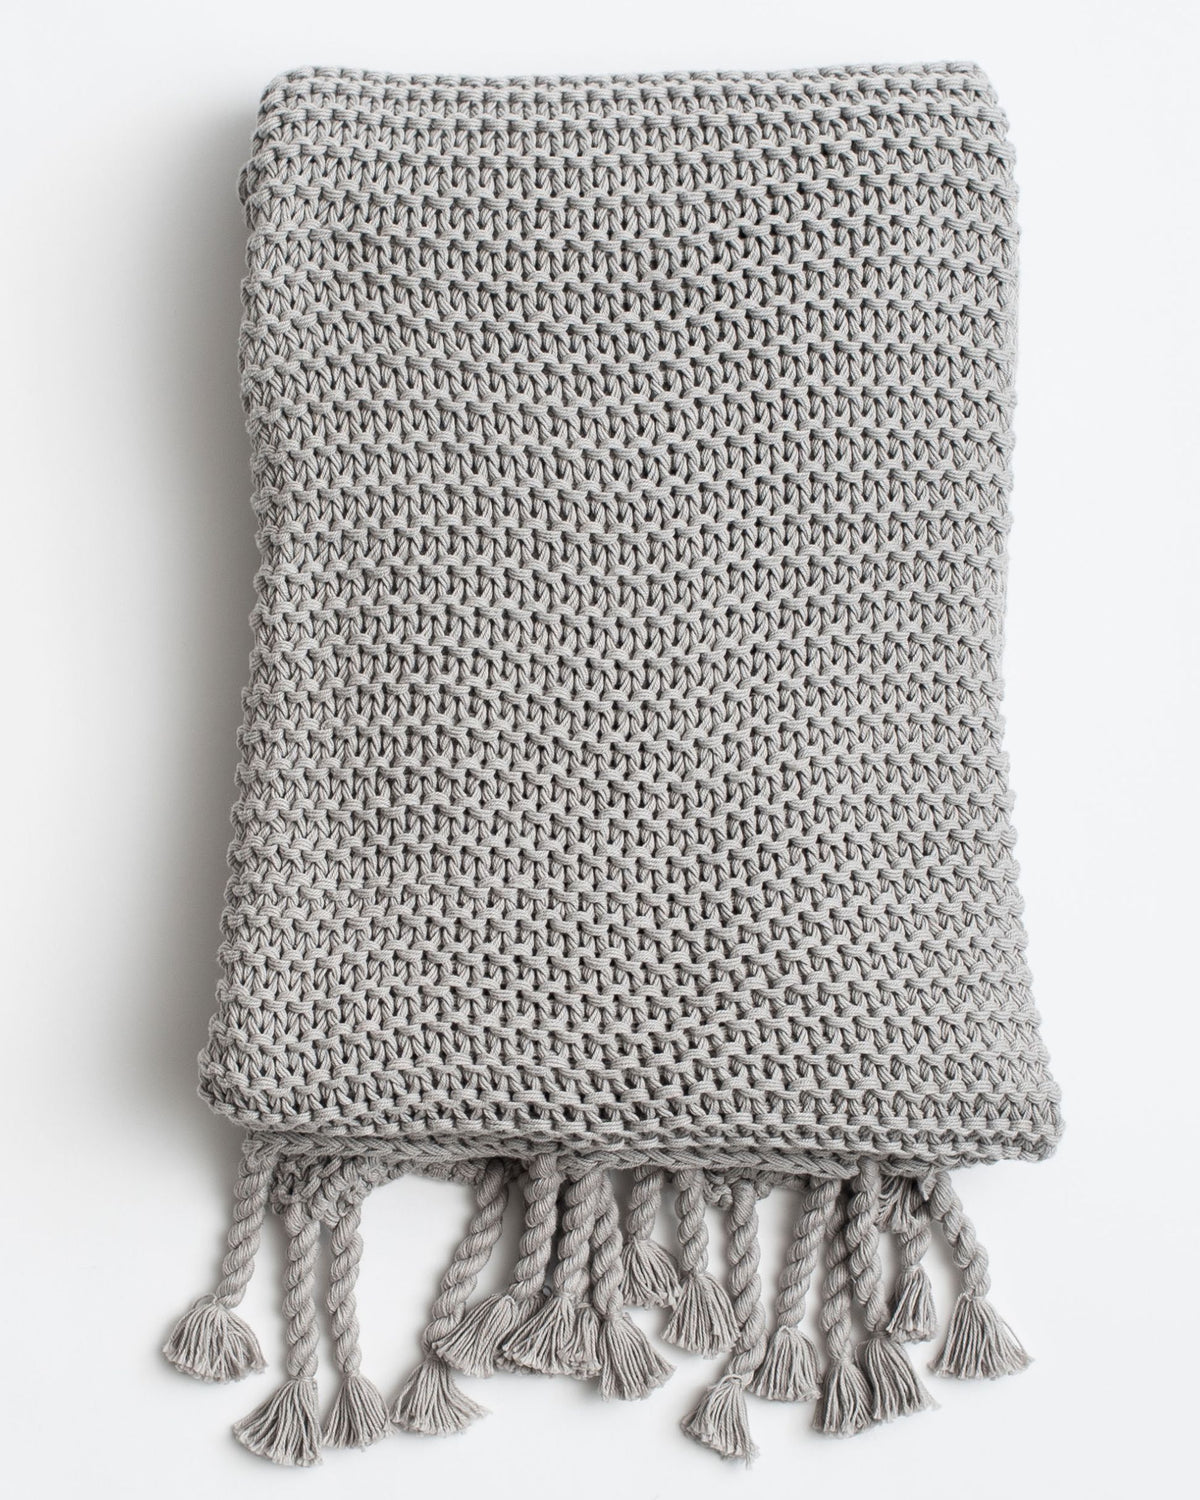 Organic Cotton Comfy Knit Throw shown in Gray